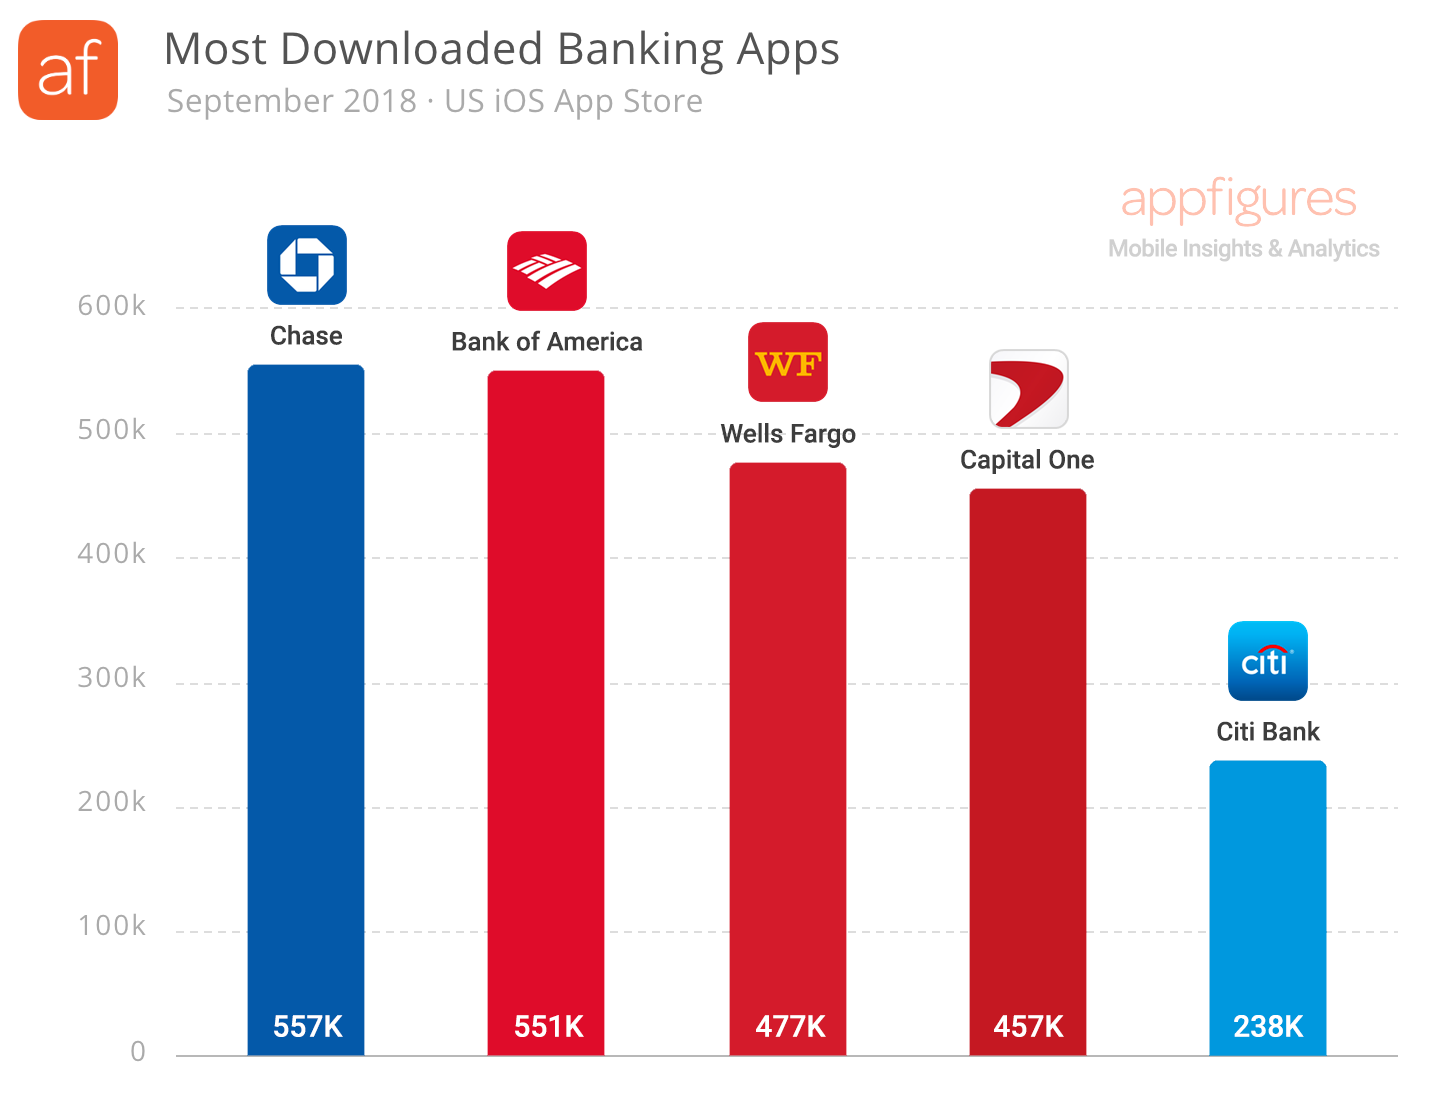 The most downloaded banking apps for iOS in the United States (September 2018)